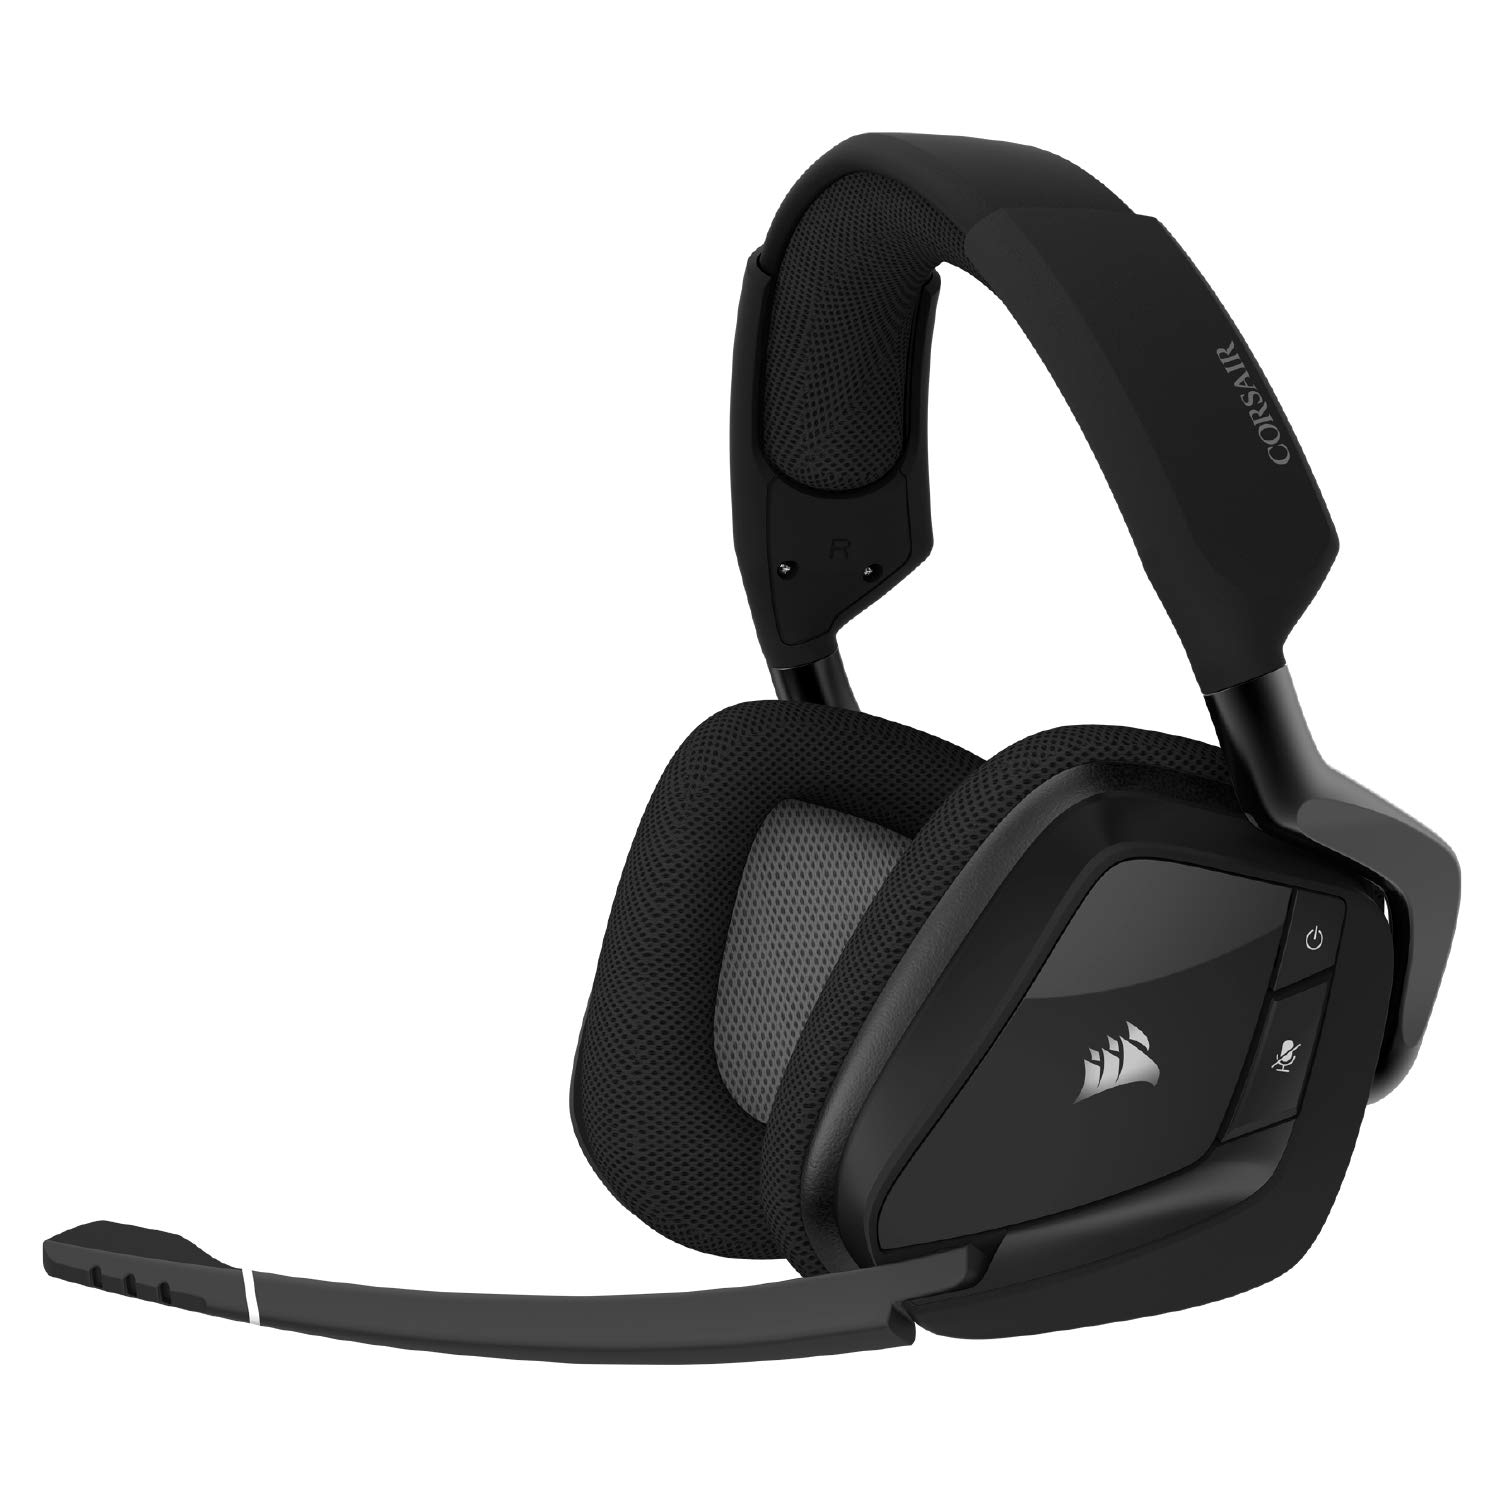 Corsair Void RGB Elite Wireless Premium Gaming Headset with 7.1 Surround Sound - Discord Certified - Works with PC, PS5 and PS4 - Carbon (CA-9011201-NA), Black